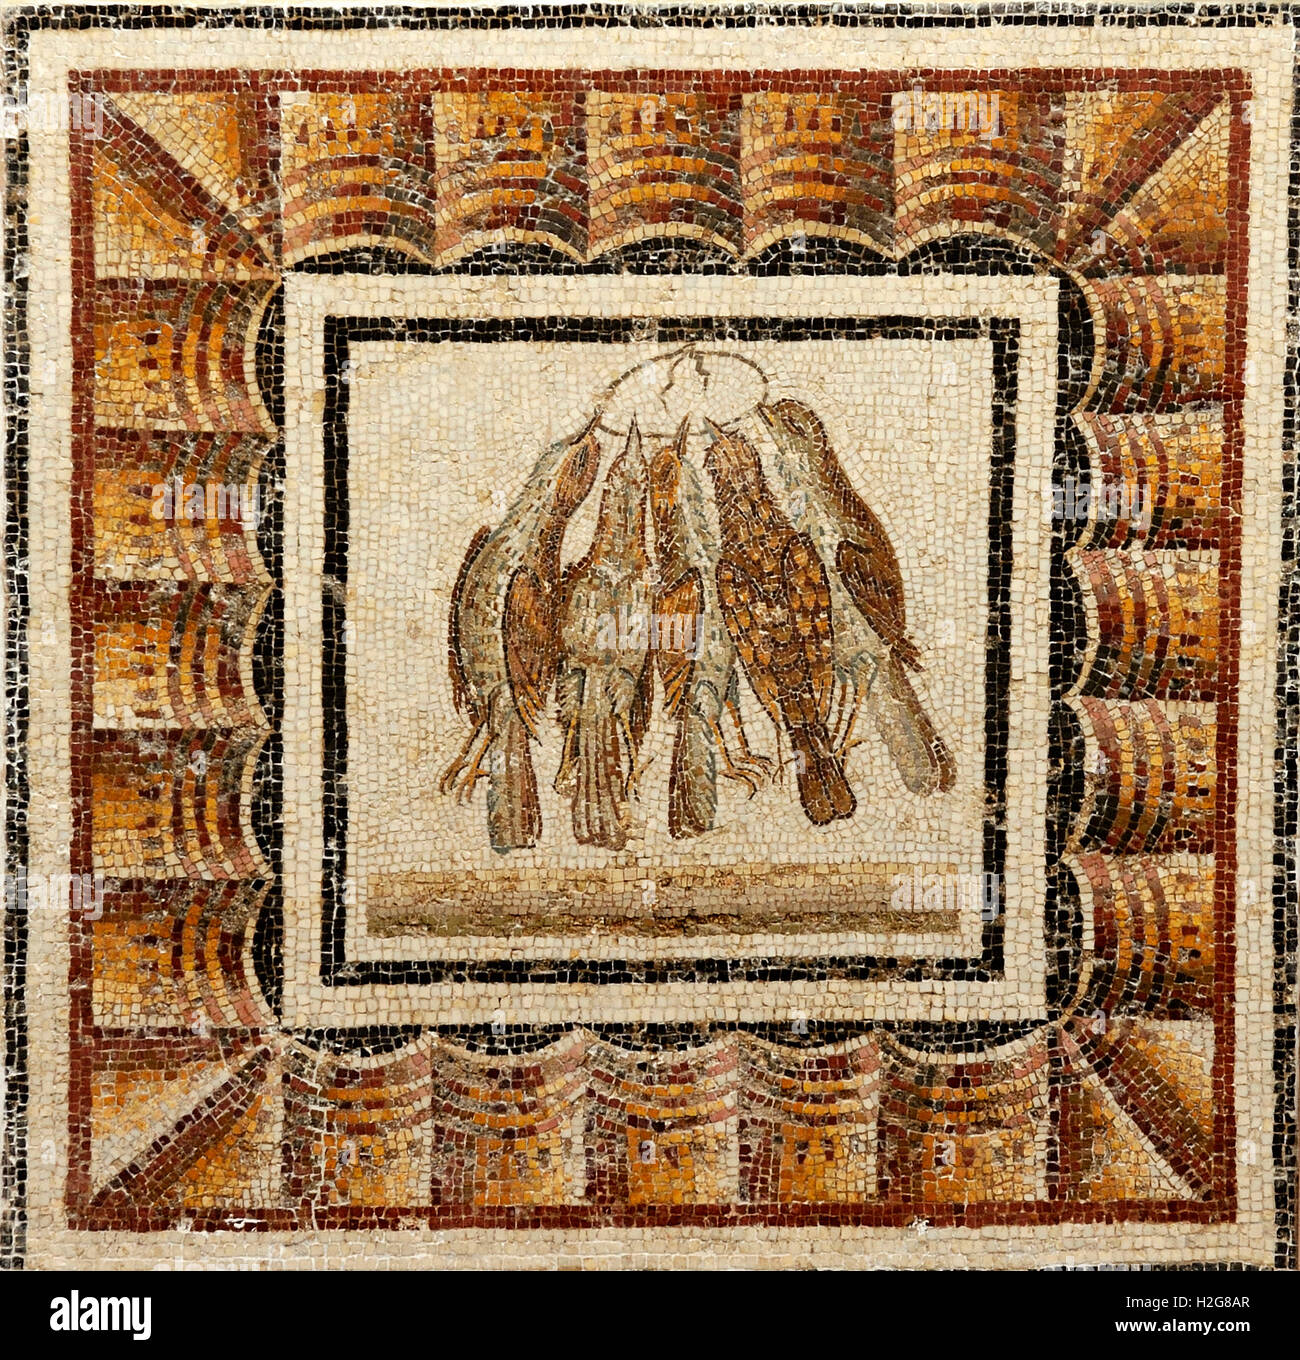 A wreath of trapped thrushes mosaic, late 2nd century AD, Roman from pavement of a triclinium (dining room) at Thysdrus, El-Jem, Stock Photo